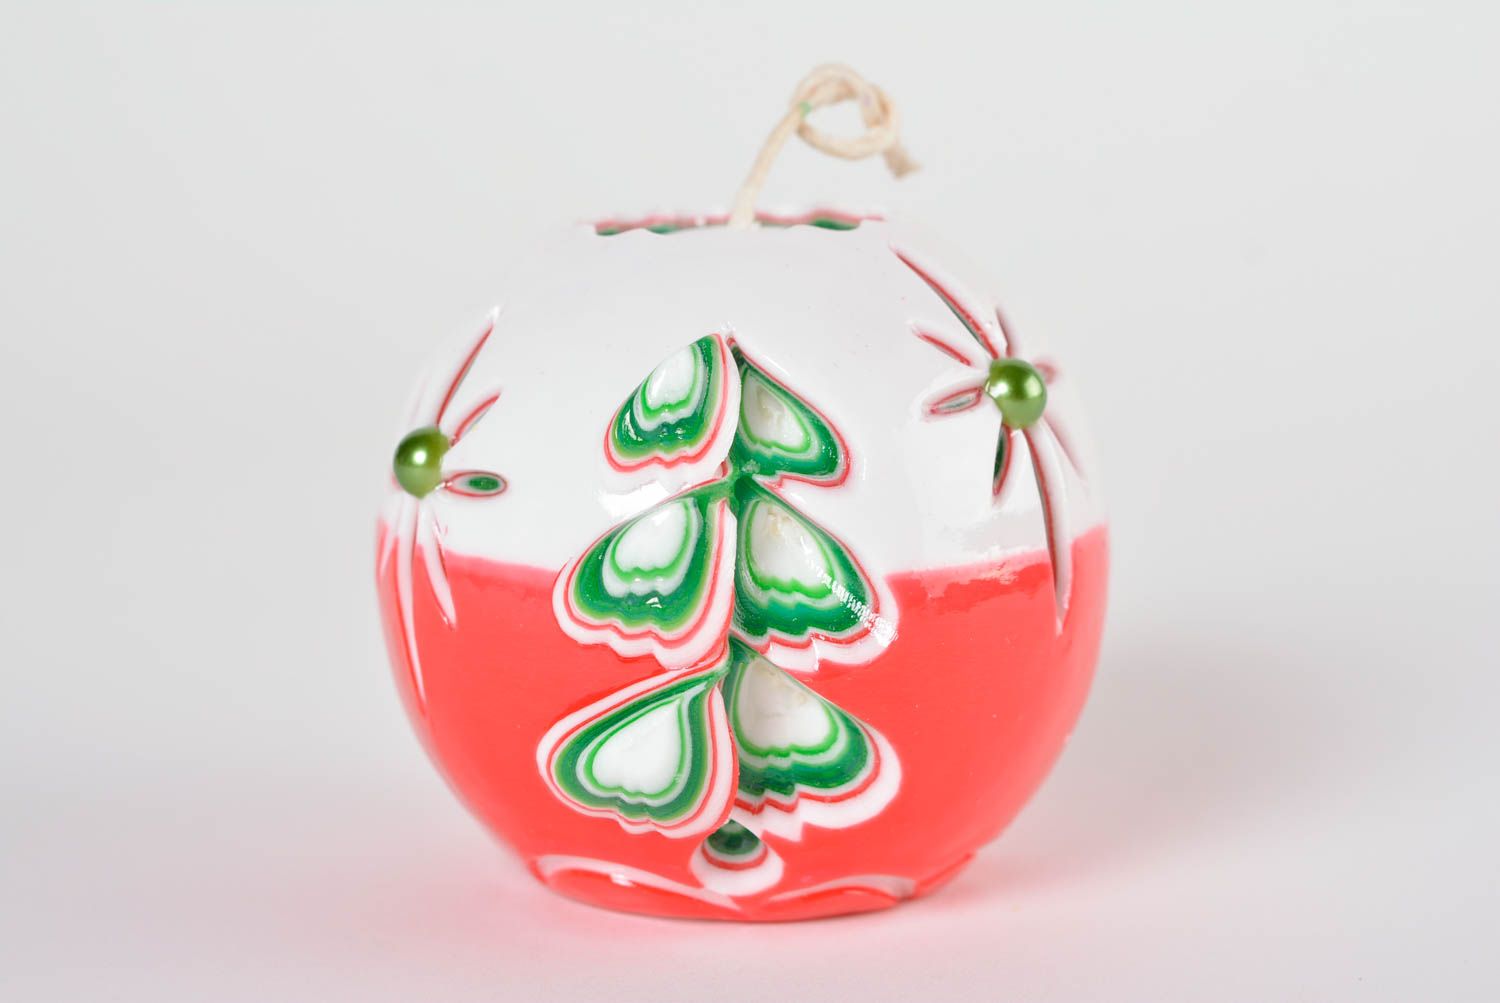 Round handmade candle festive candles paraffin candle designs gift ideas photo 1